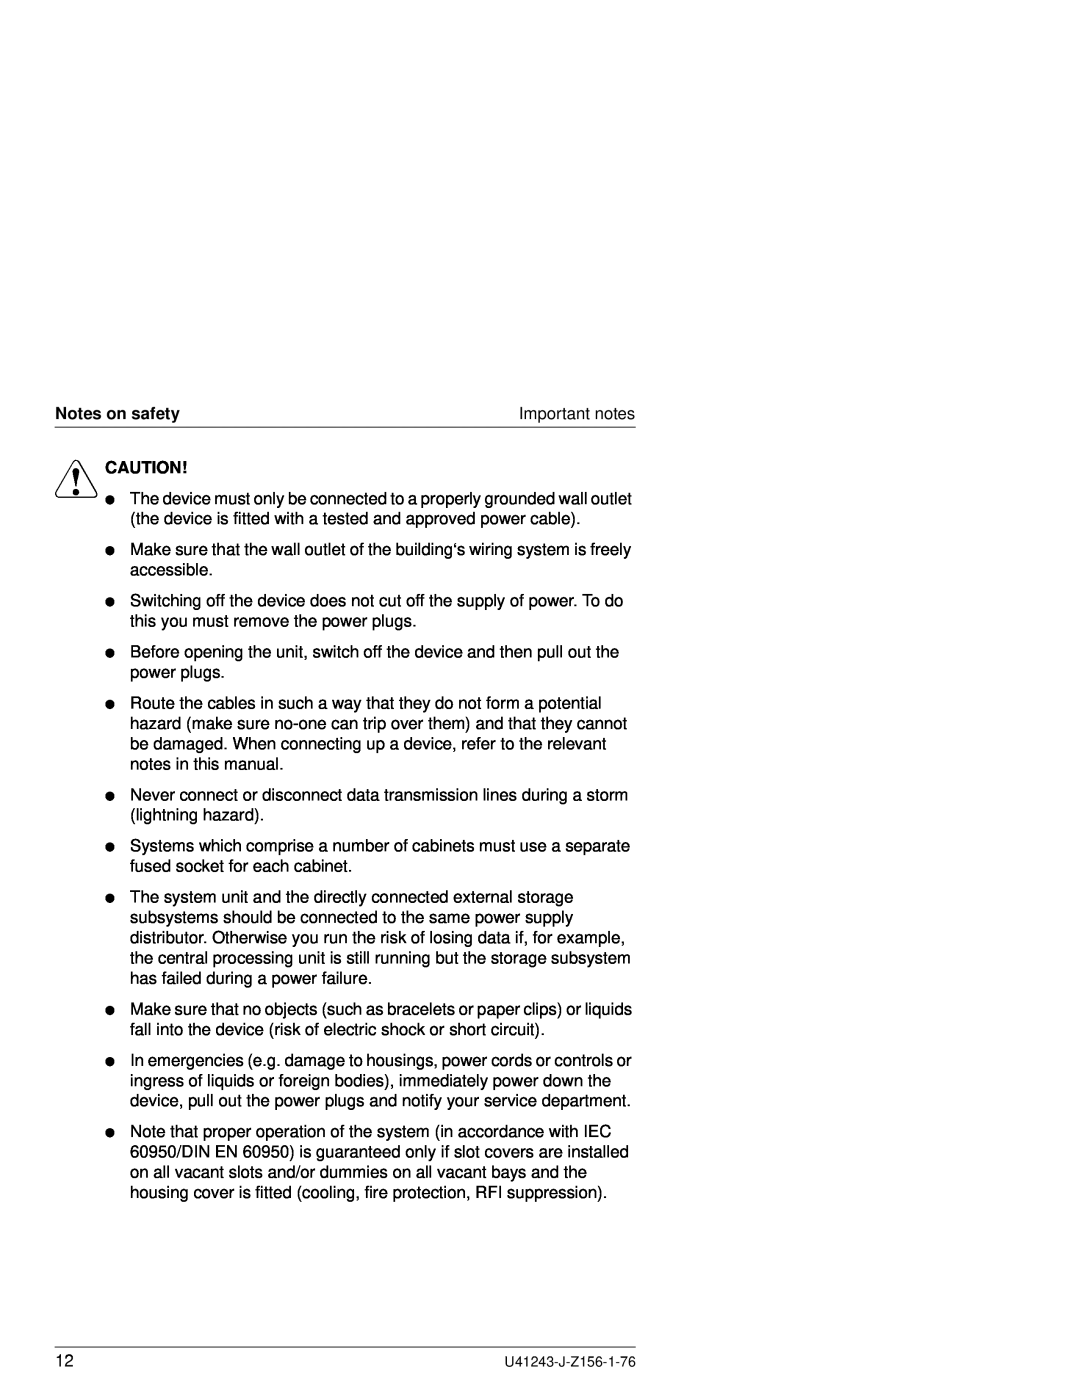 Fujitsu N800 manual Notes on safety, V Caution, Important notes 